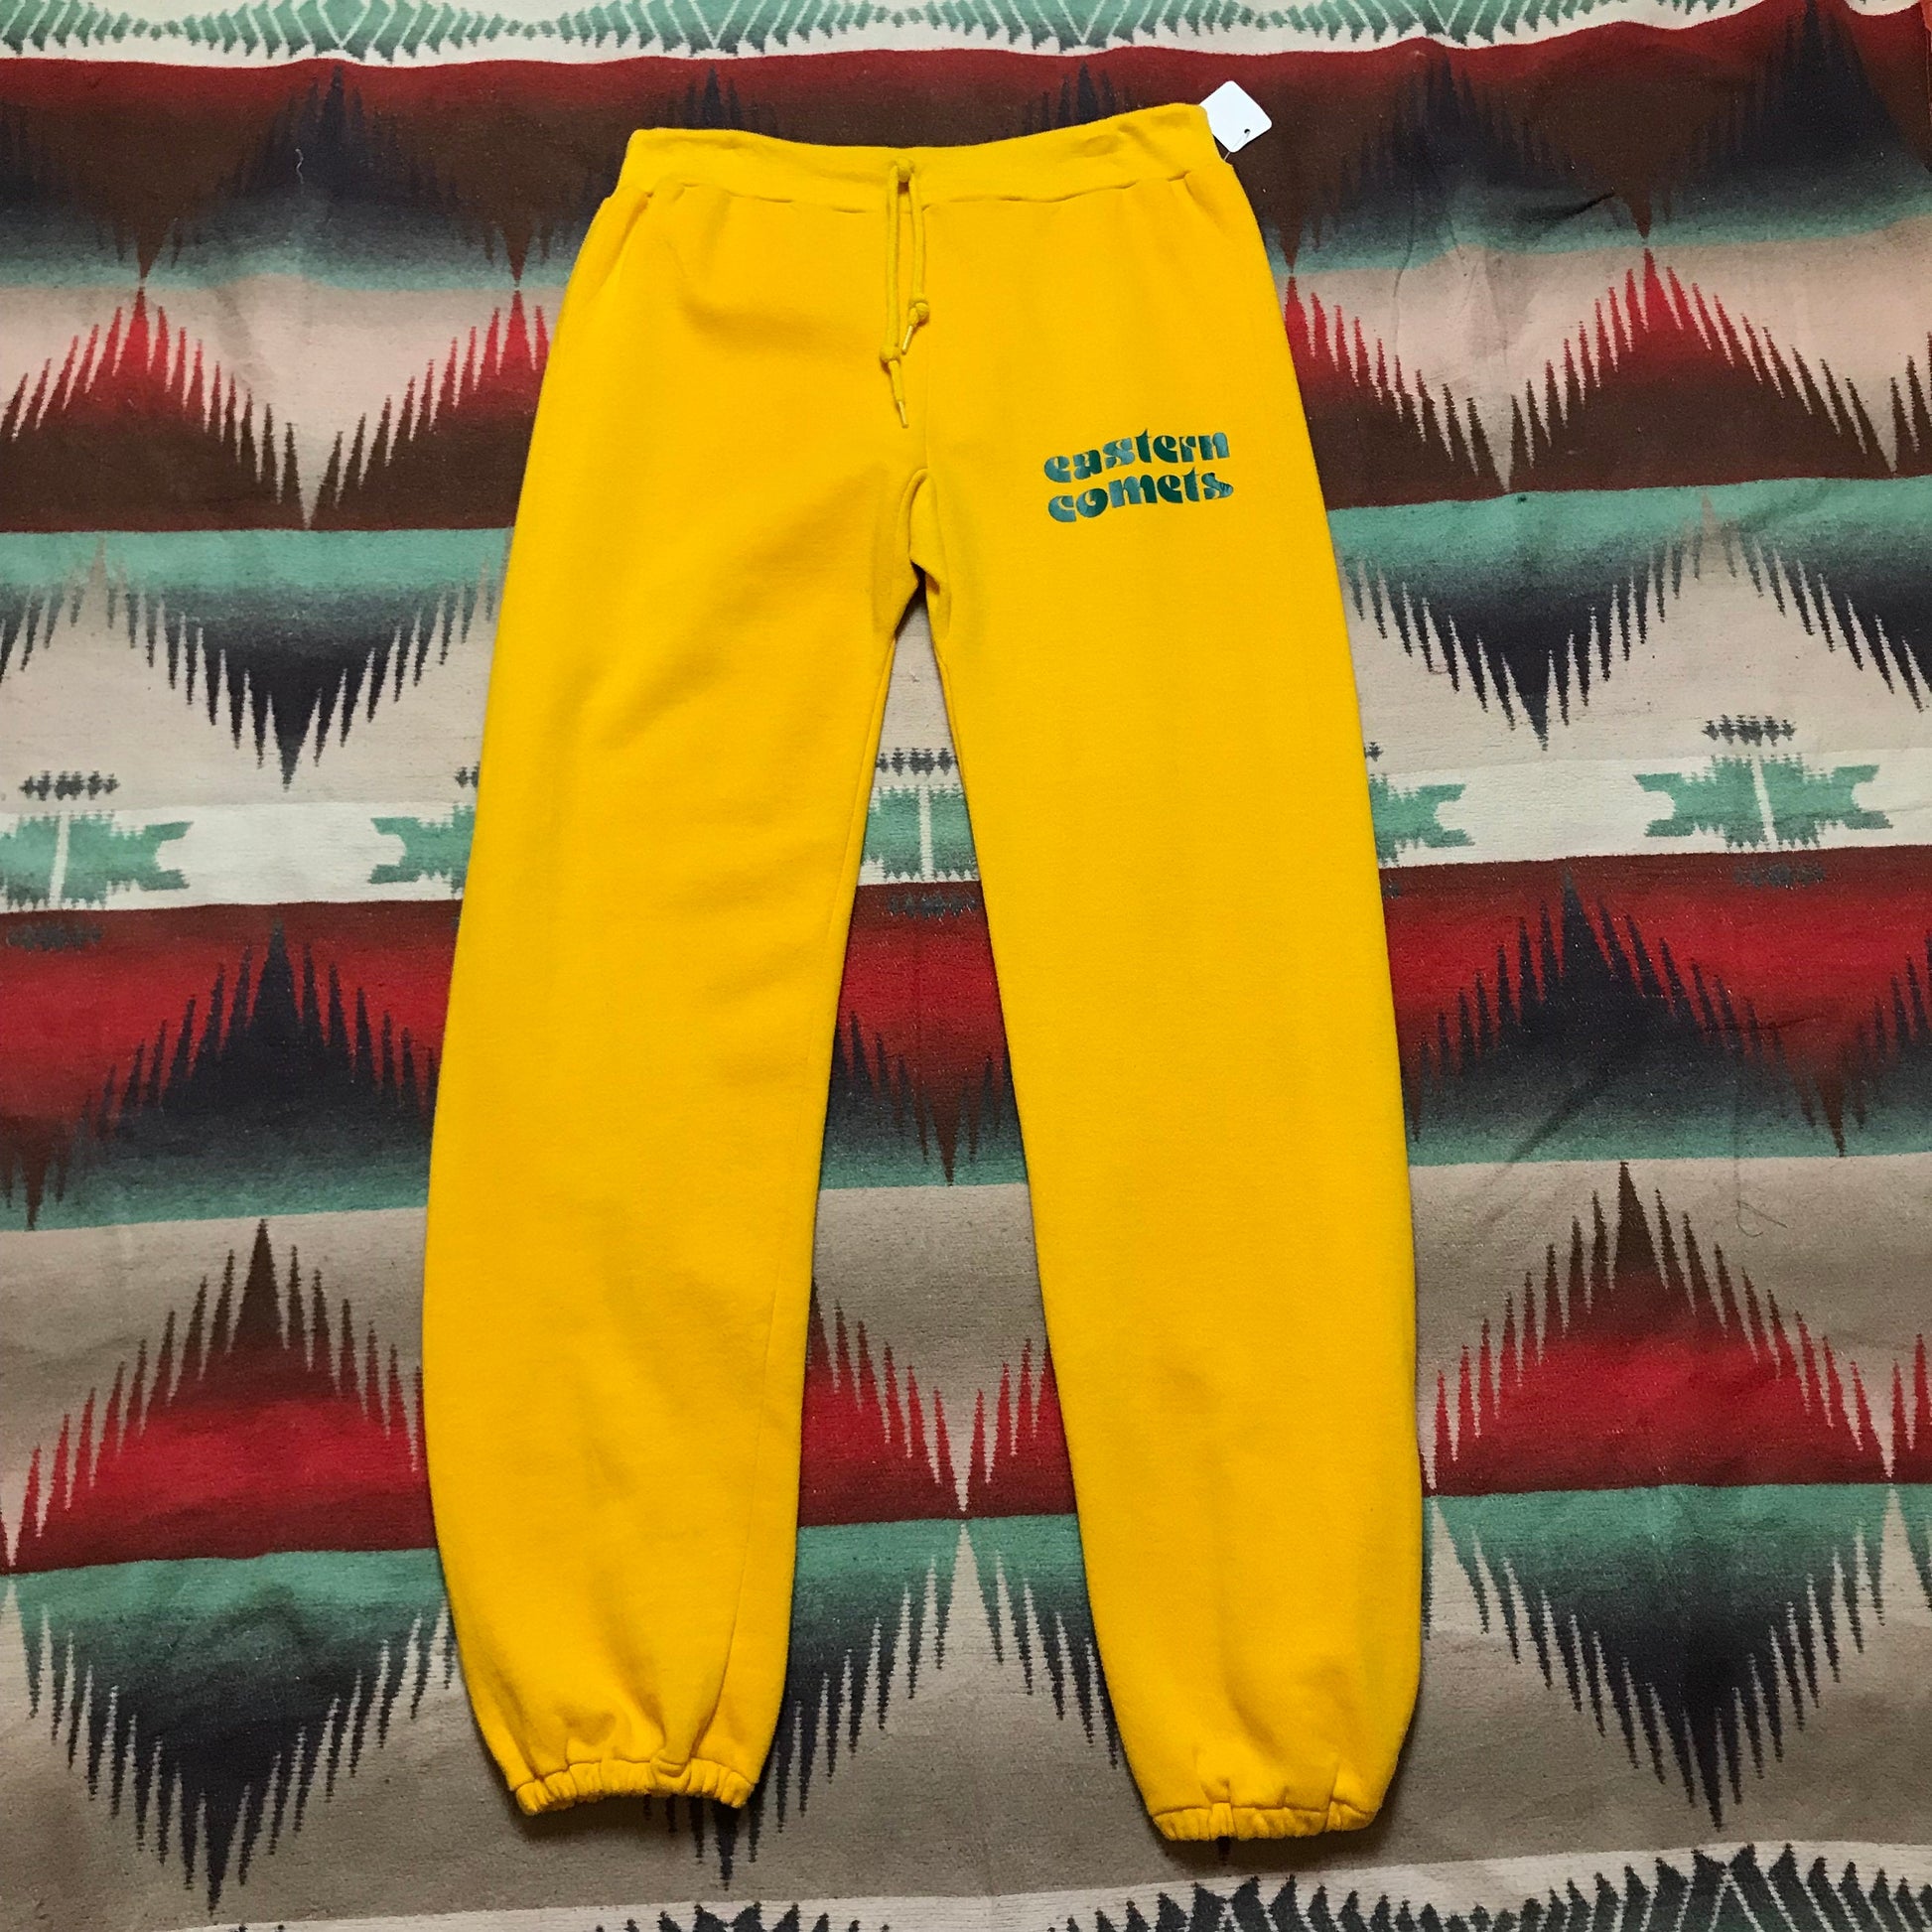 1970s/1980s Eastern Comets Sweatpants Made in USA Size L